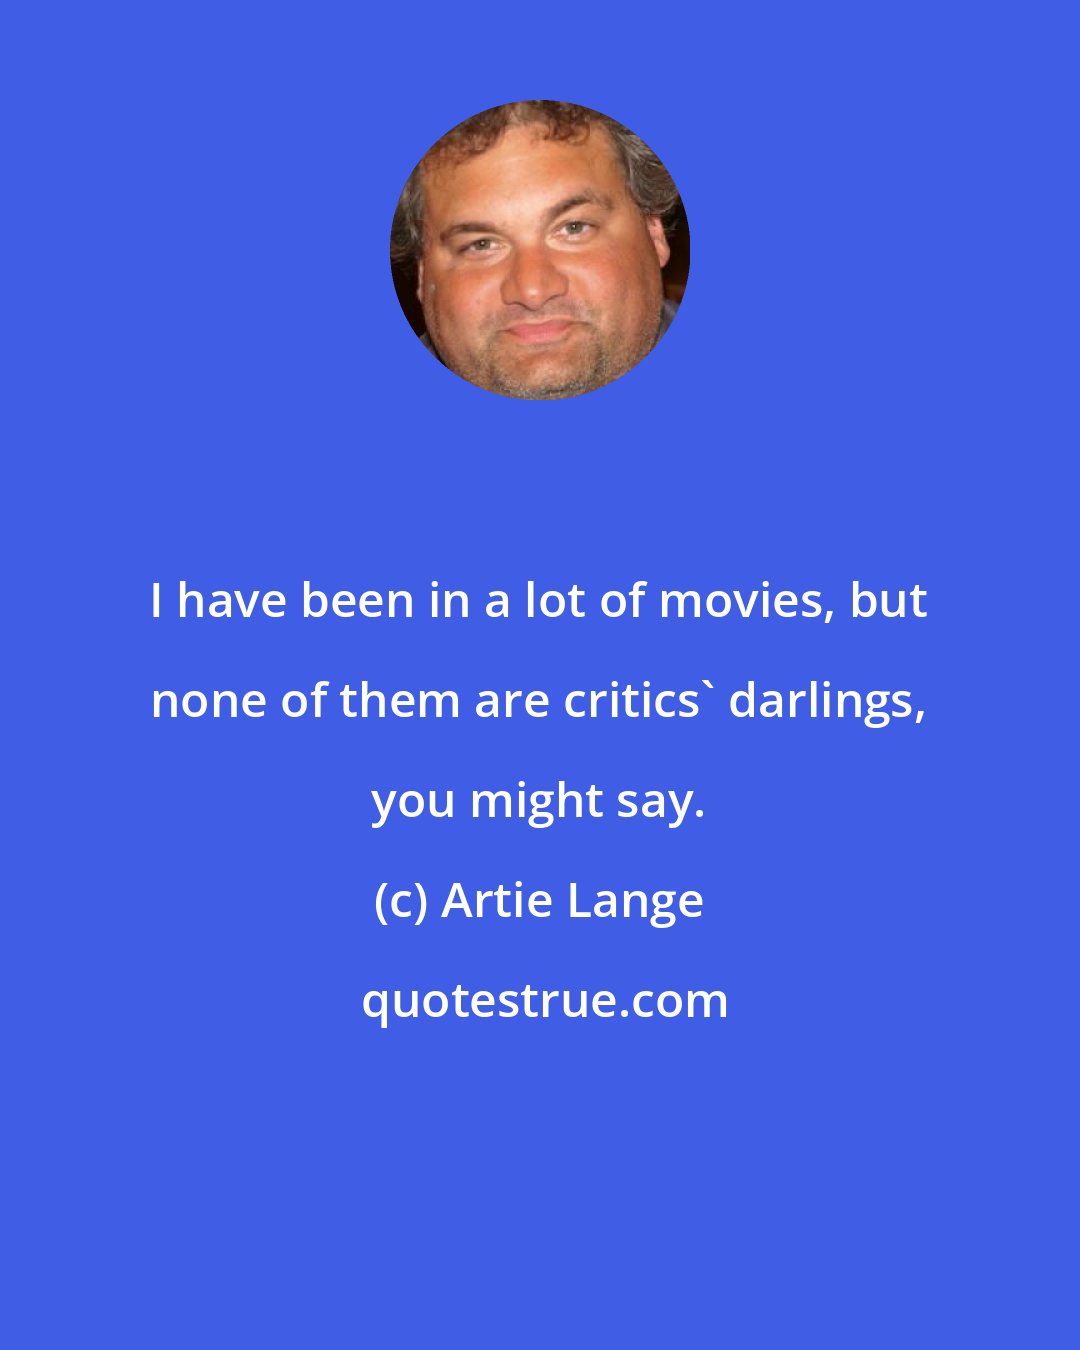 Artie Lange: I have been in a lot of movies, but none of them are critics' darlings, you might say.